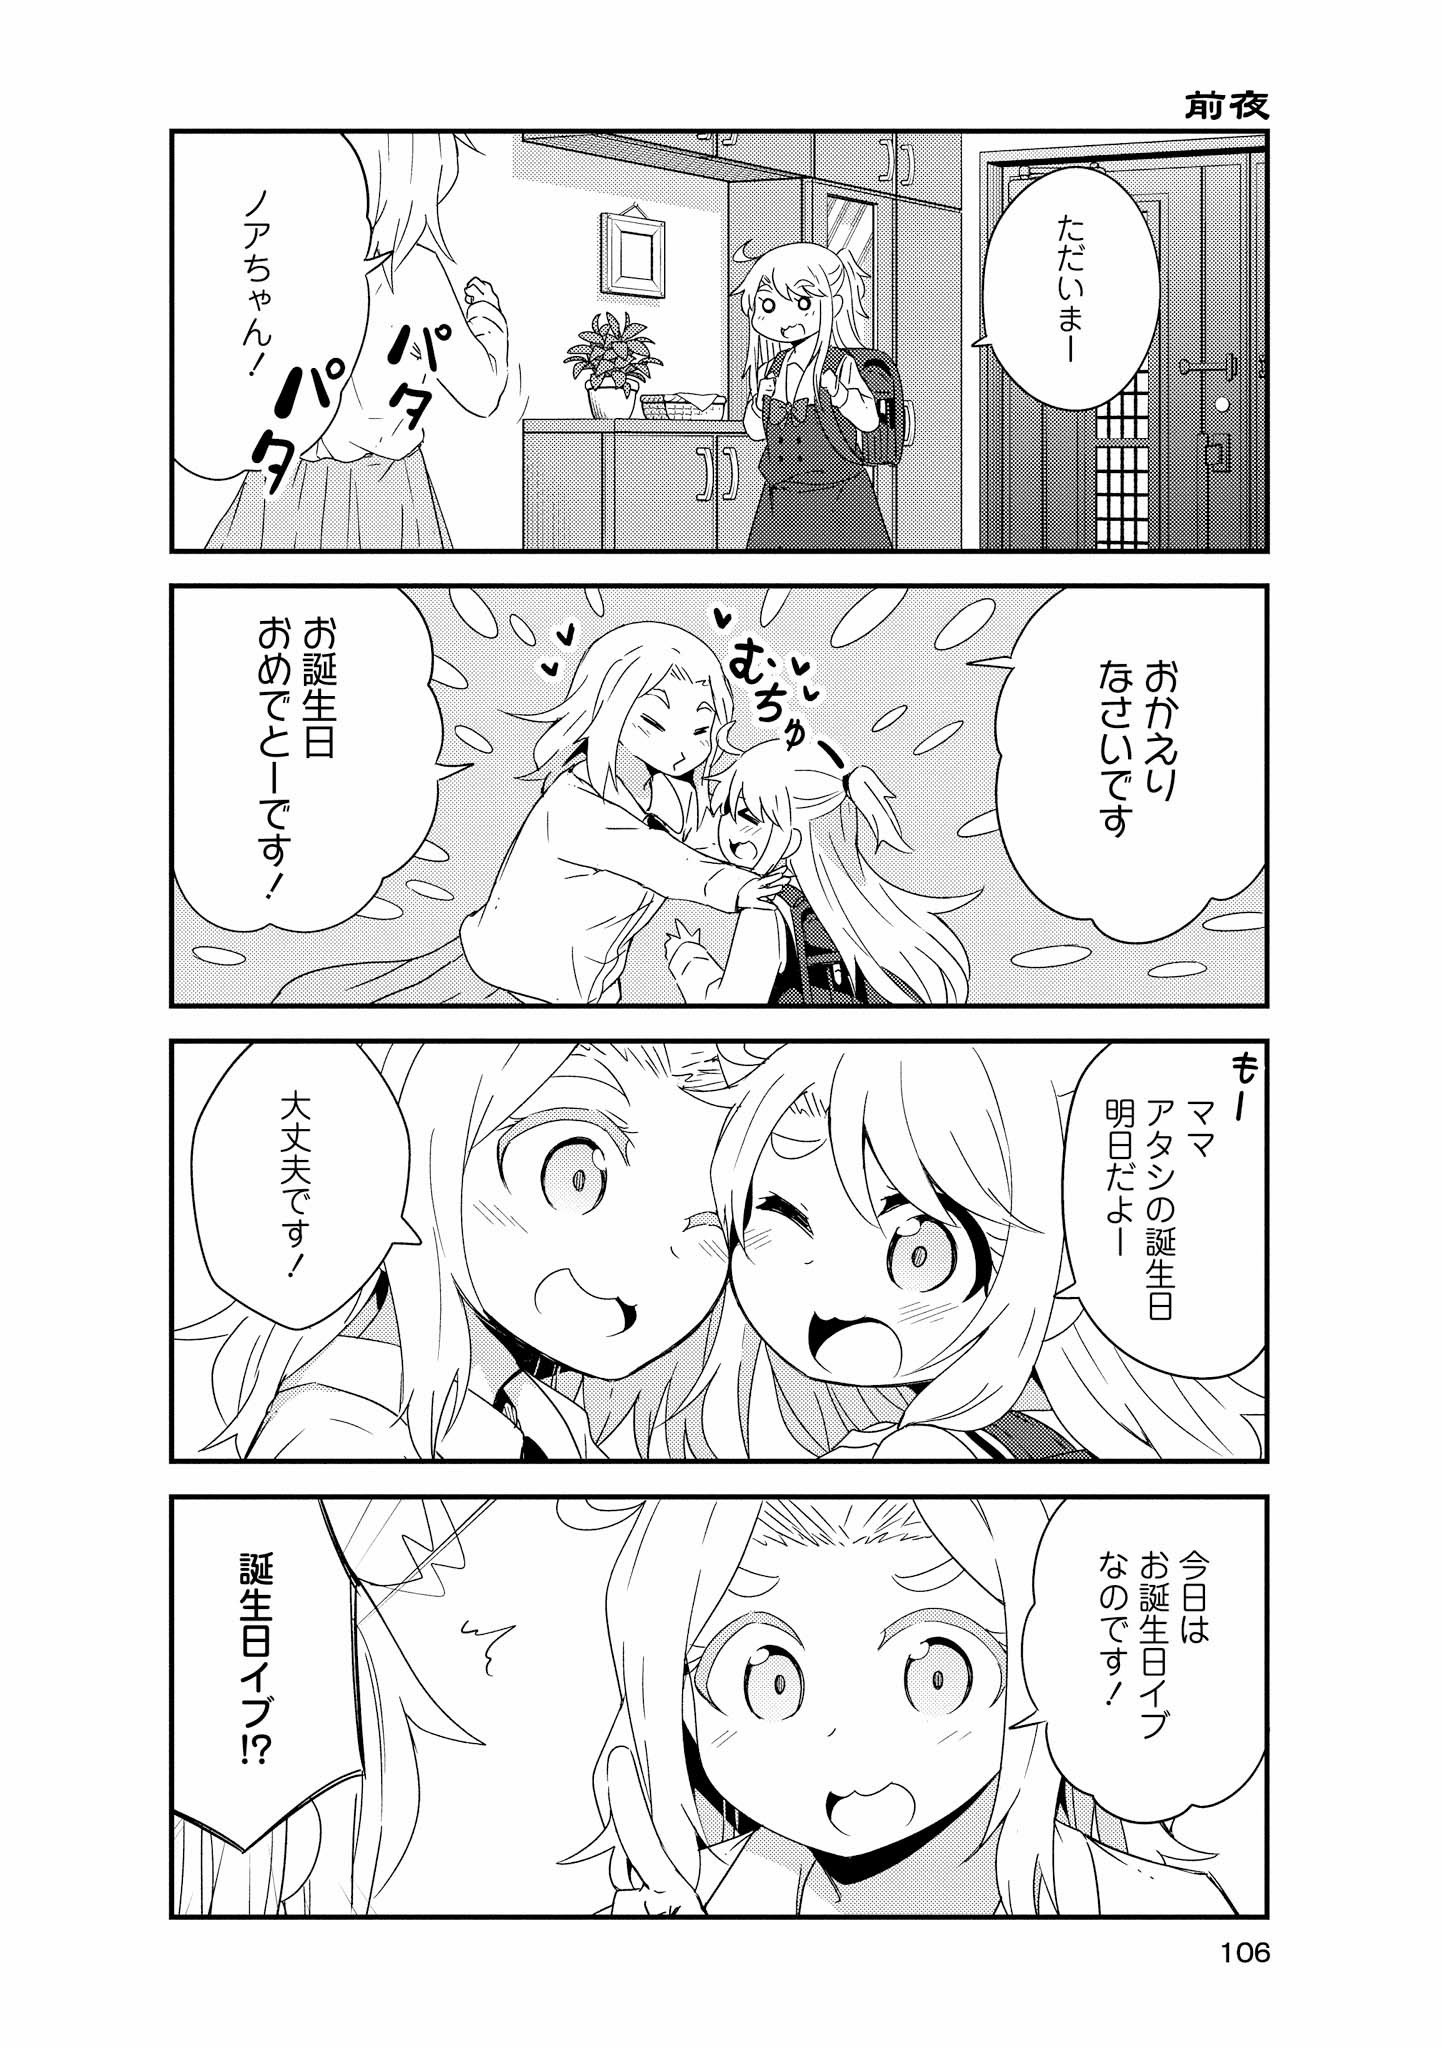 Wataten! An Angel Flew Down to Me 私に天使が舞い降りた！ 第42話 - Page 8